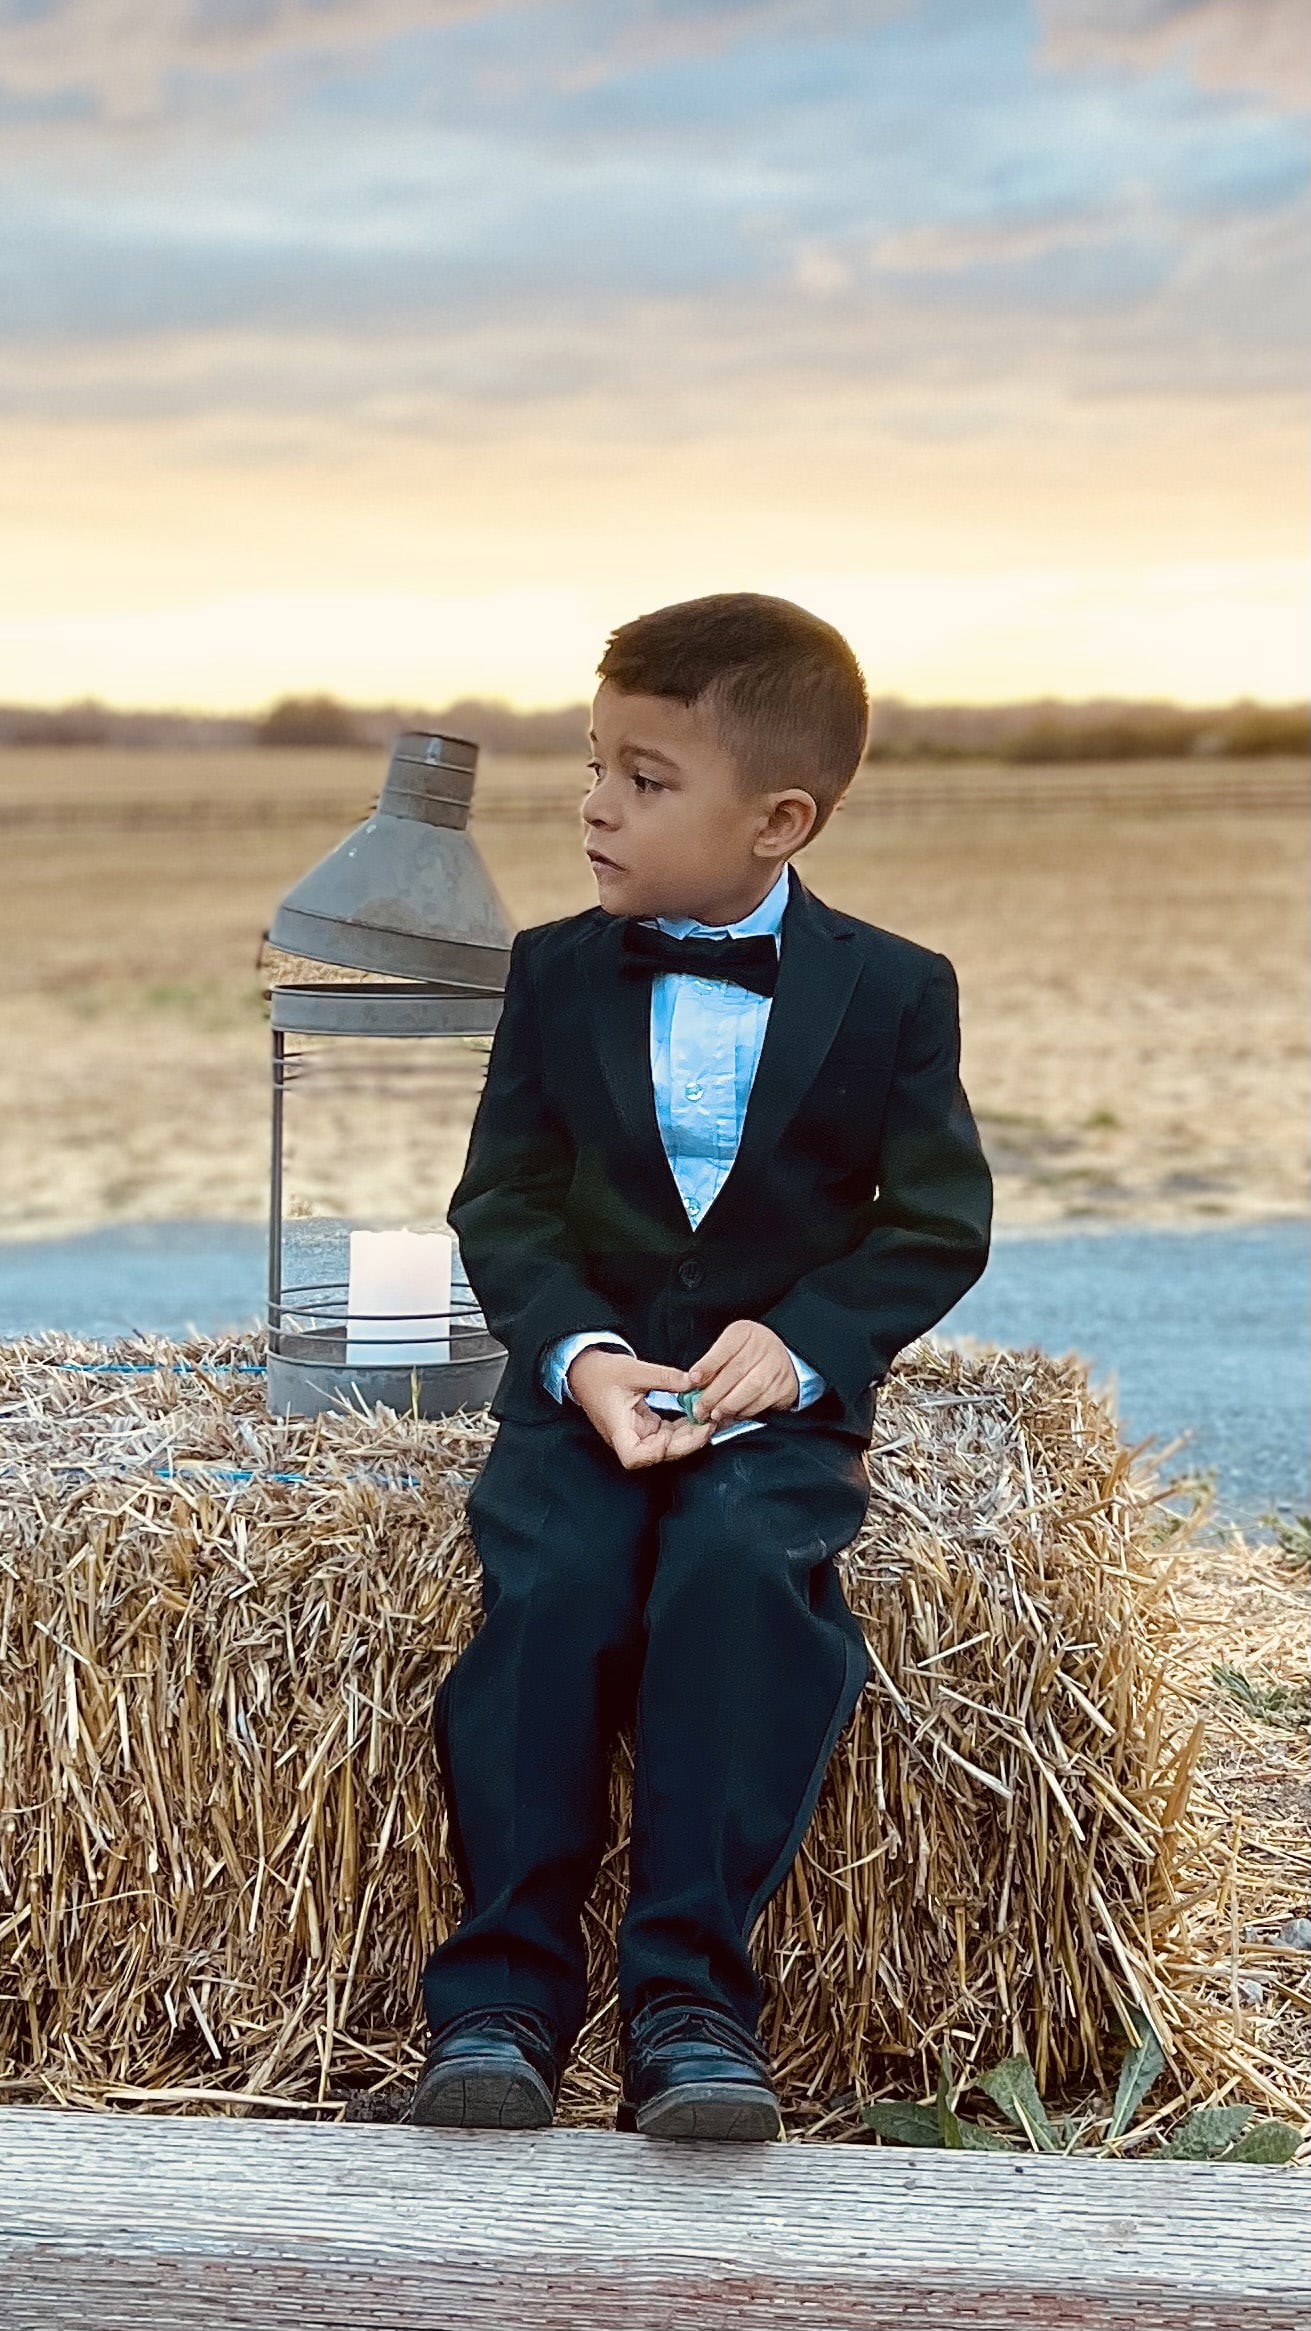 Young boy dressed in a formal tuxedo standing confidently in an open field, adding a touch of elegance to the natural setting.